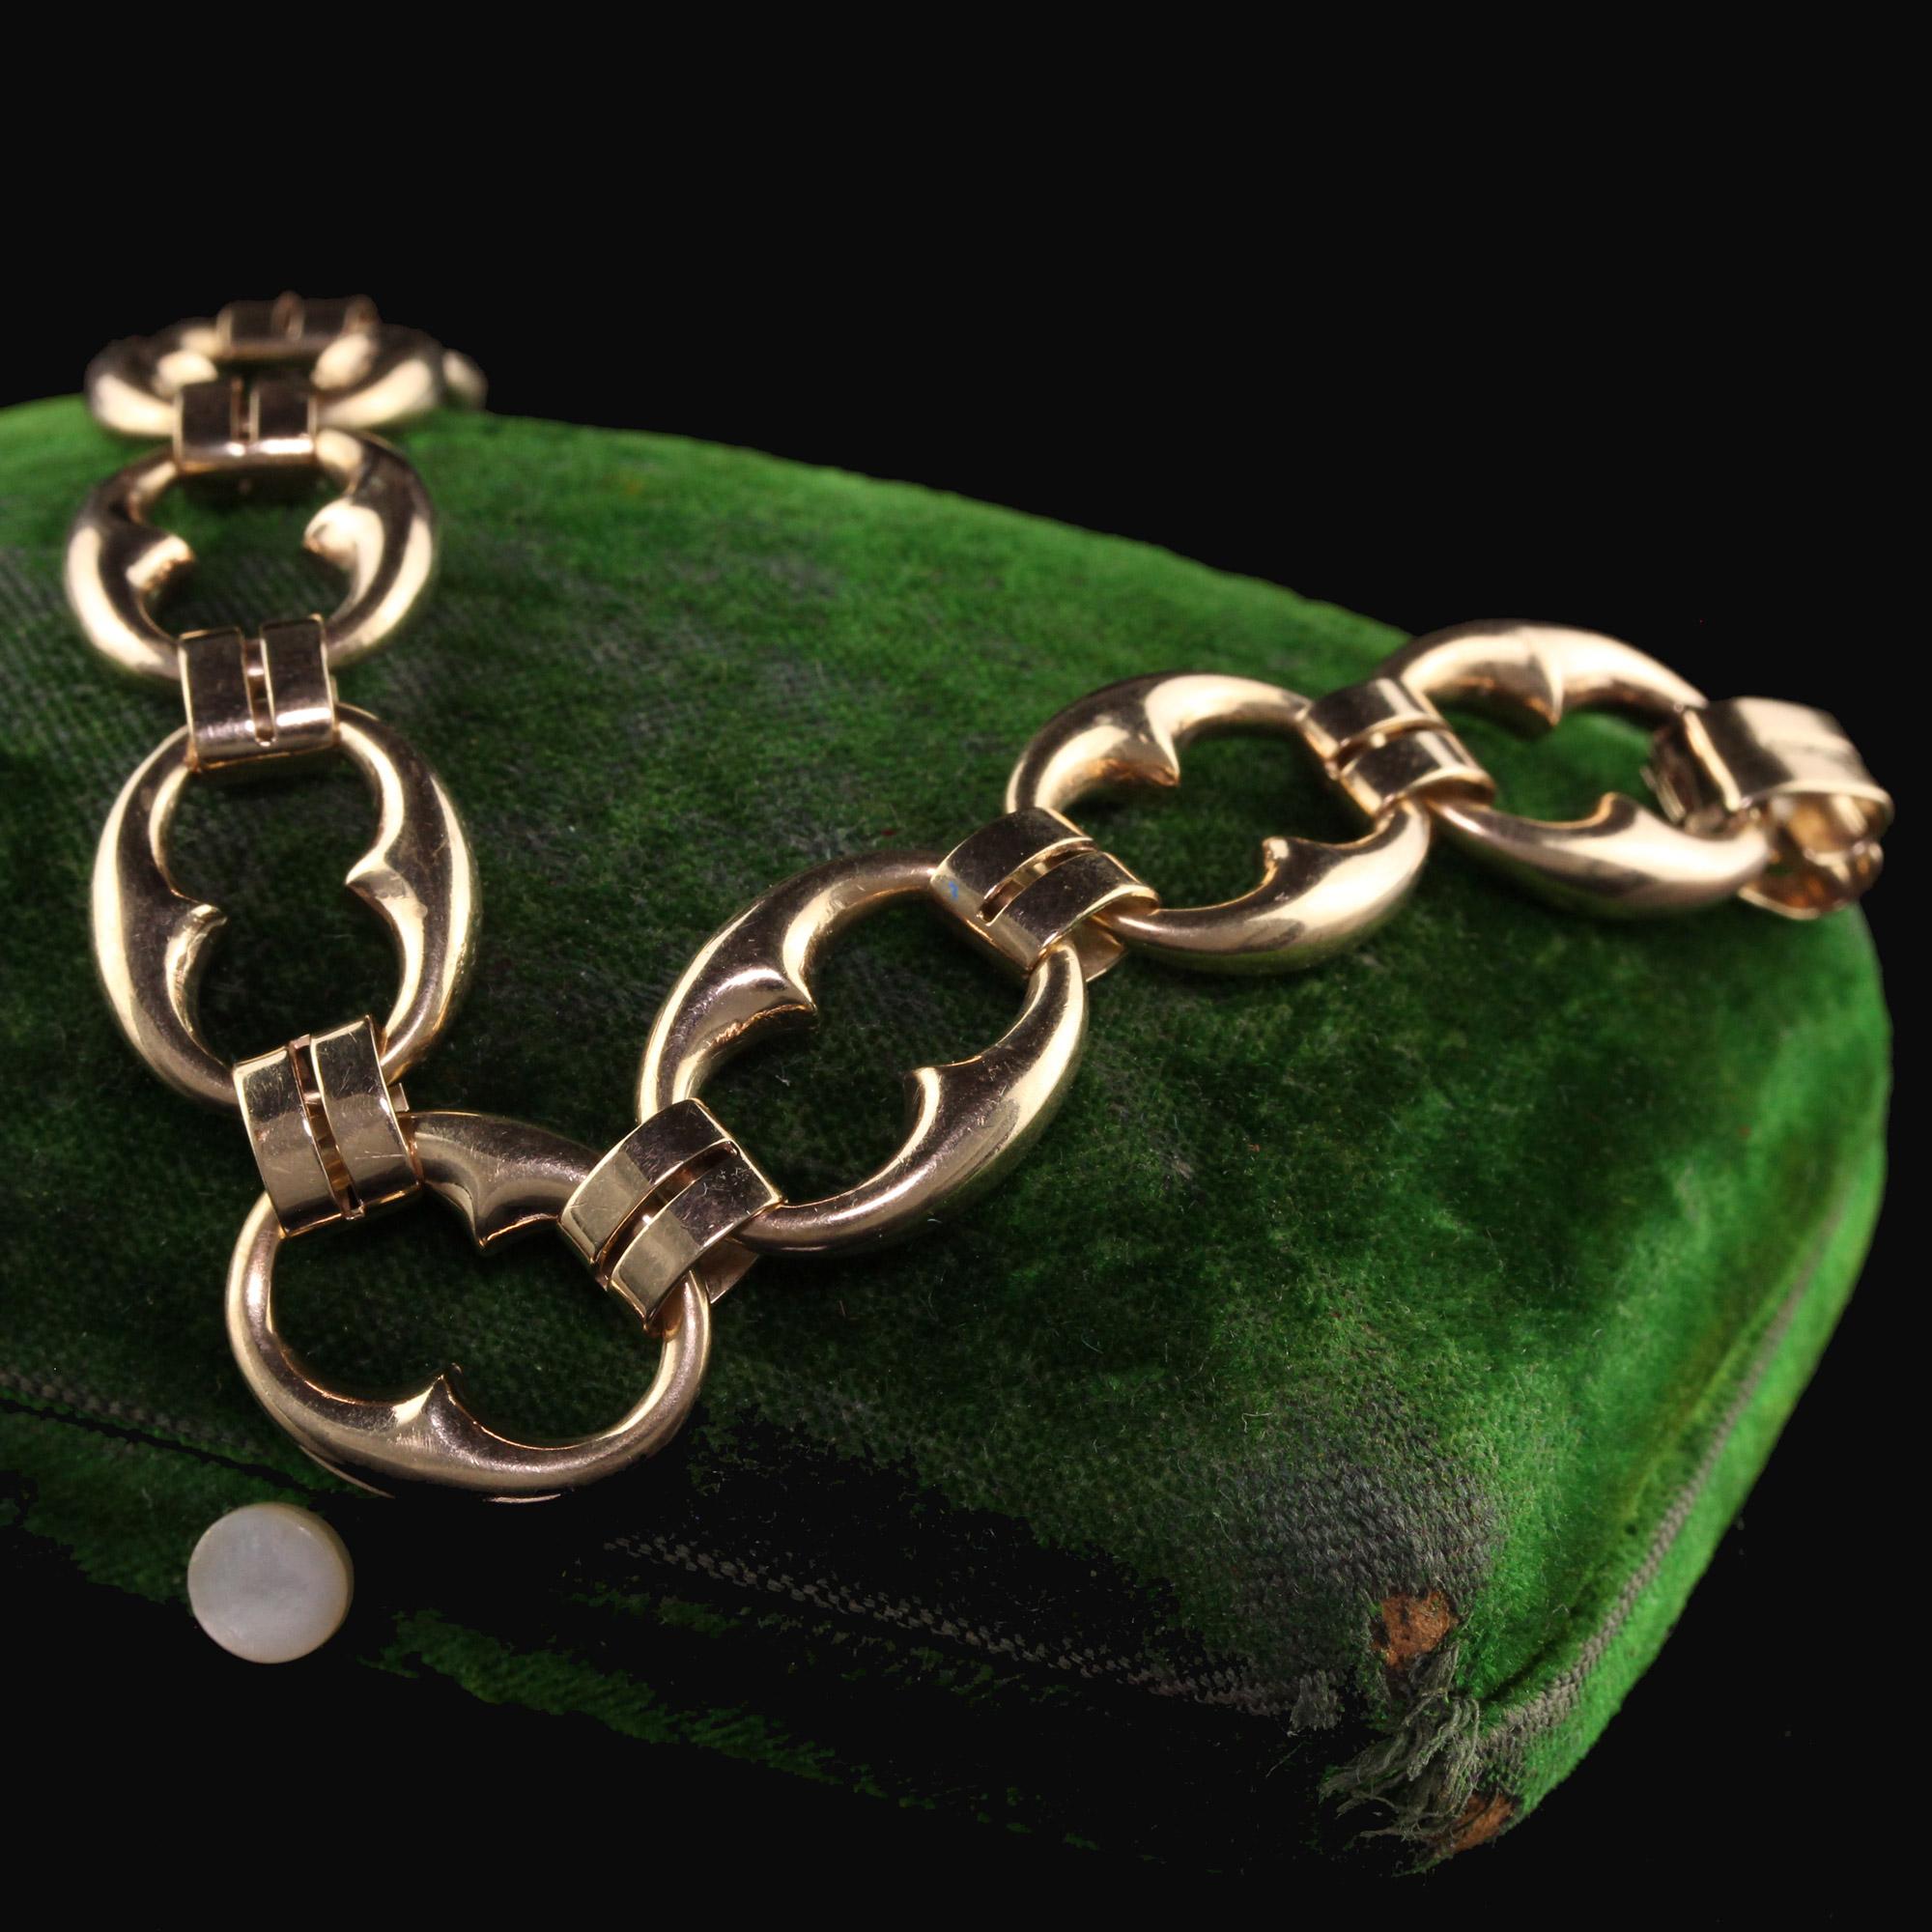 Beautiful Antique Victorian 9K Yellow Gold Intricate Link Hallmarked Bracelet - 7 inches. This beautiful bracelet is crafted in 9k yellow gold. The links have a beautiful design to them and it is in great condition. The clasp is marked with the